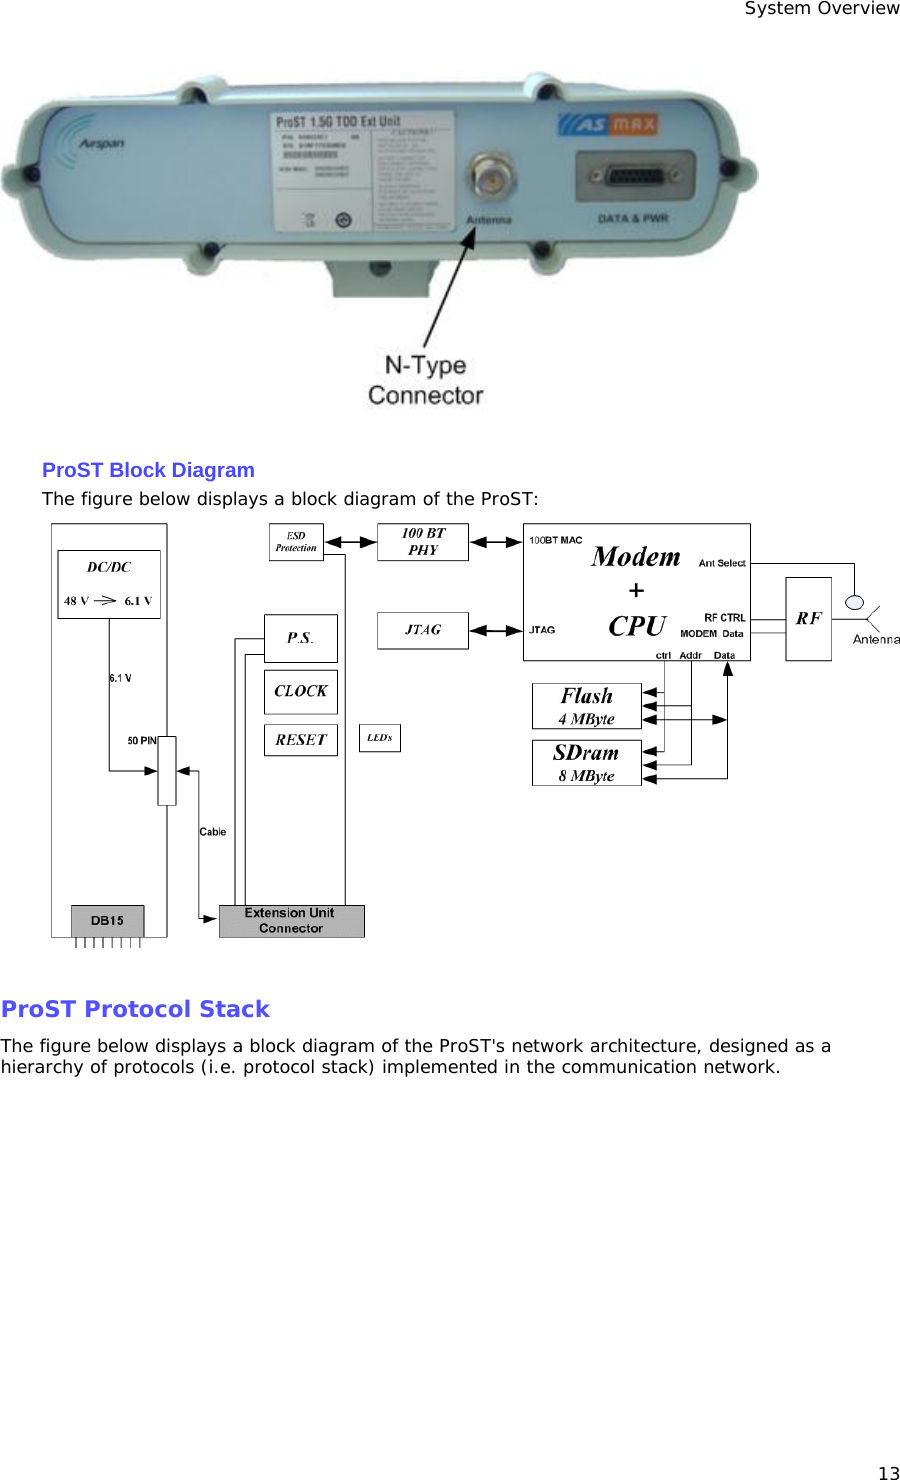 System Overview 13   ProST Block Diagram The figure below displays a block diagram of the ProST:   ProST Protocol Stack The figure below displays a block diagram of the ProST&apos;s network architecture, designed as a hierarchy of protocols (i.e. protocol stack) implemented in the communication network. 